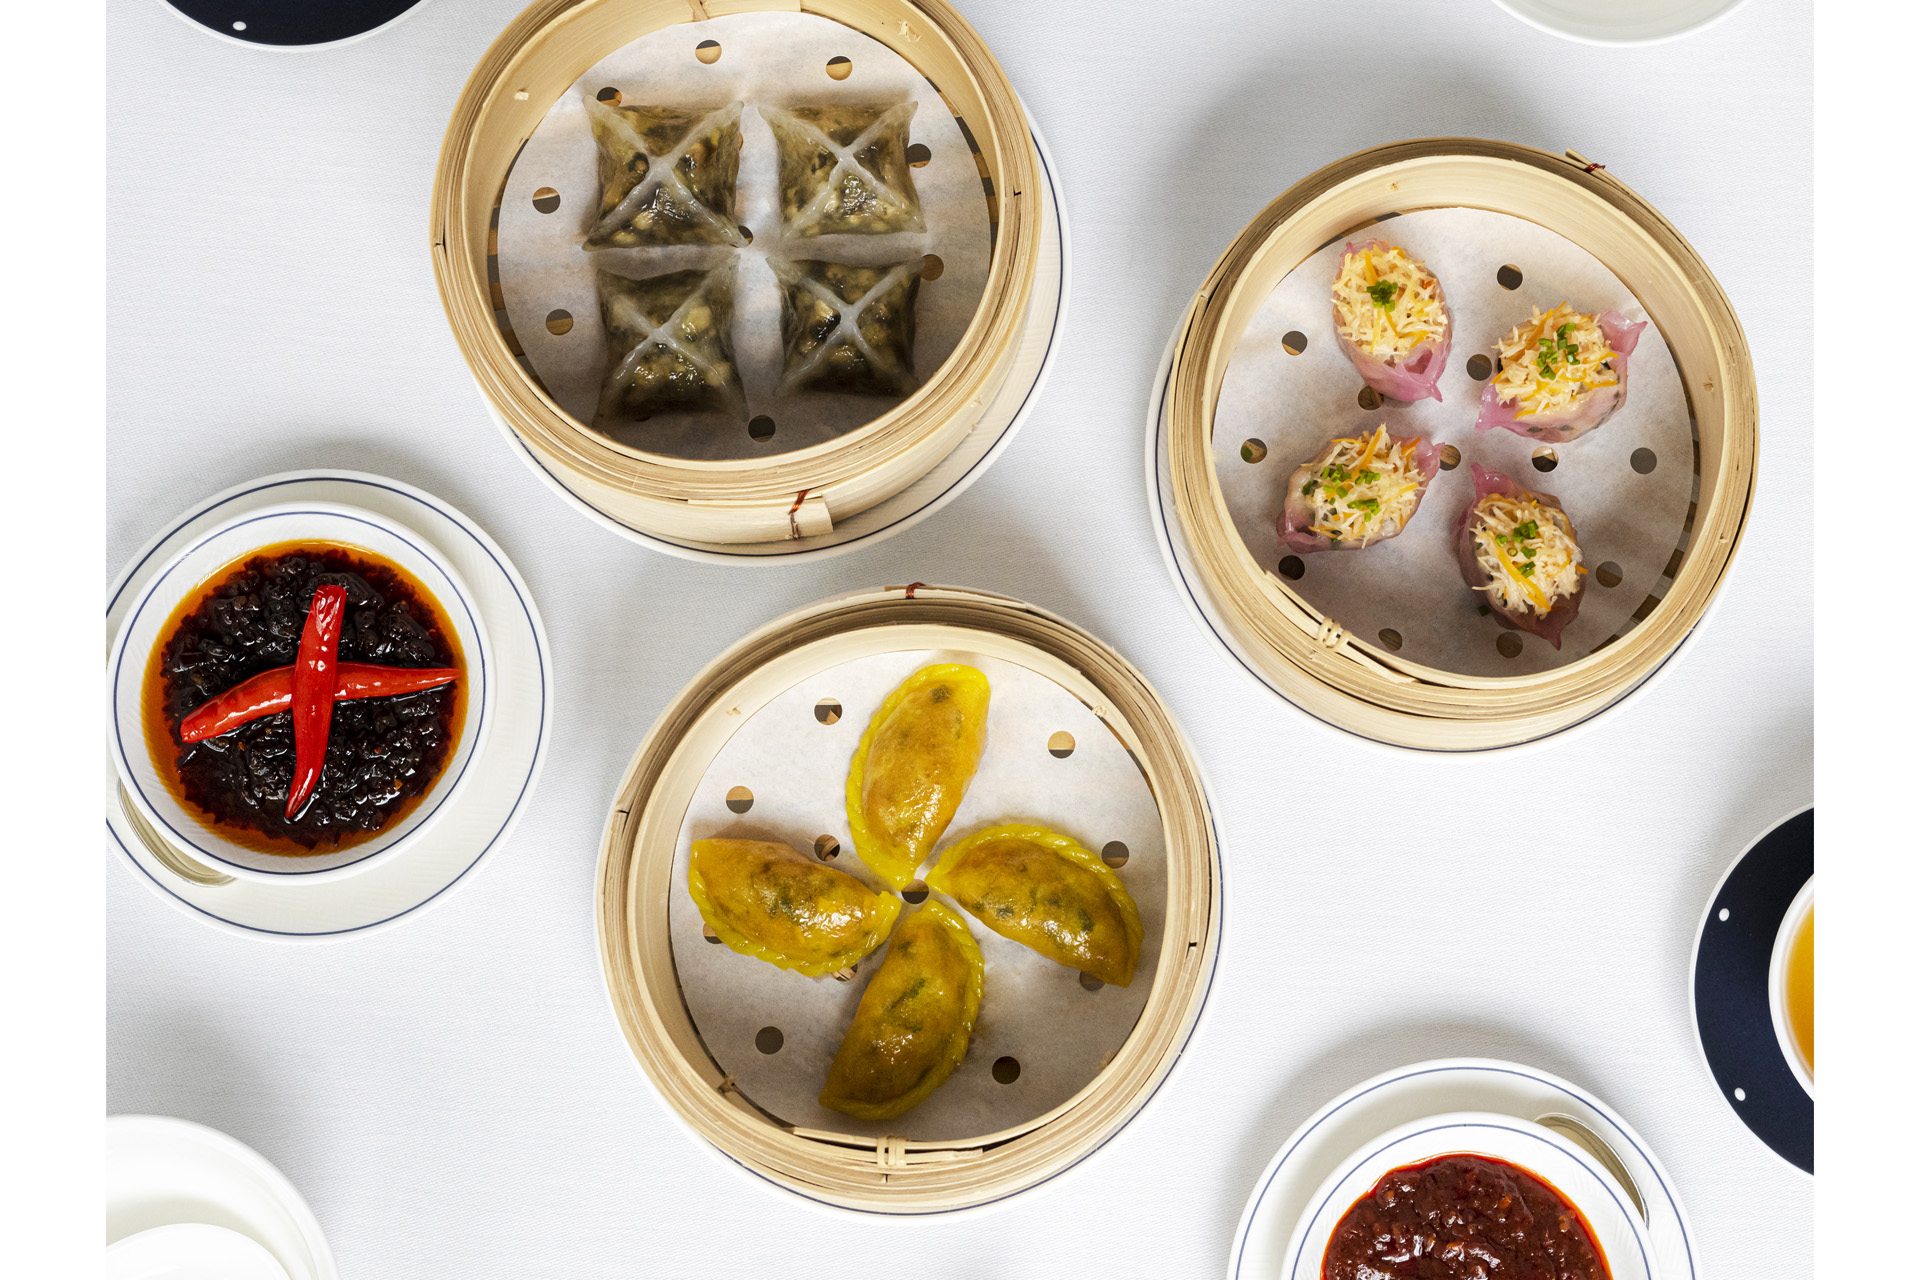 Plates of dim sum on a white table